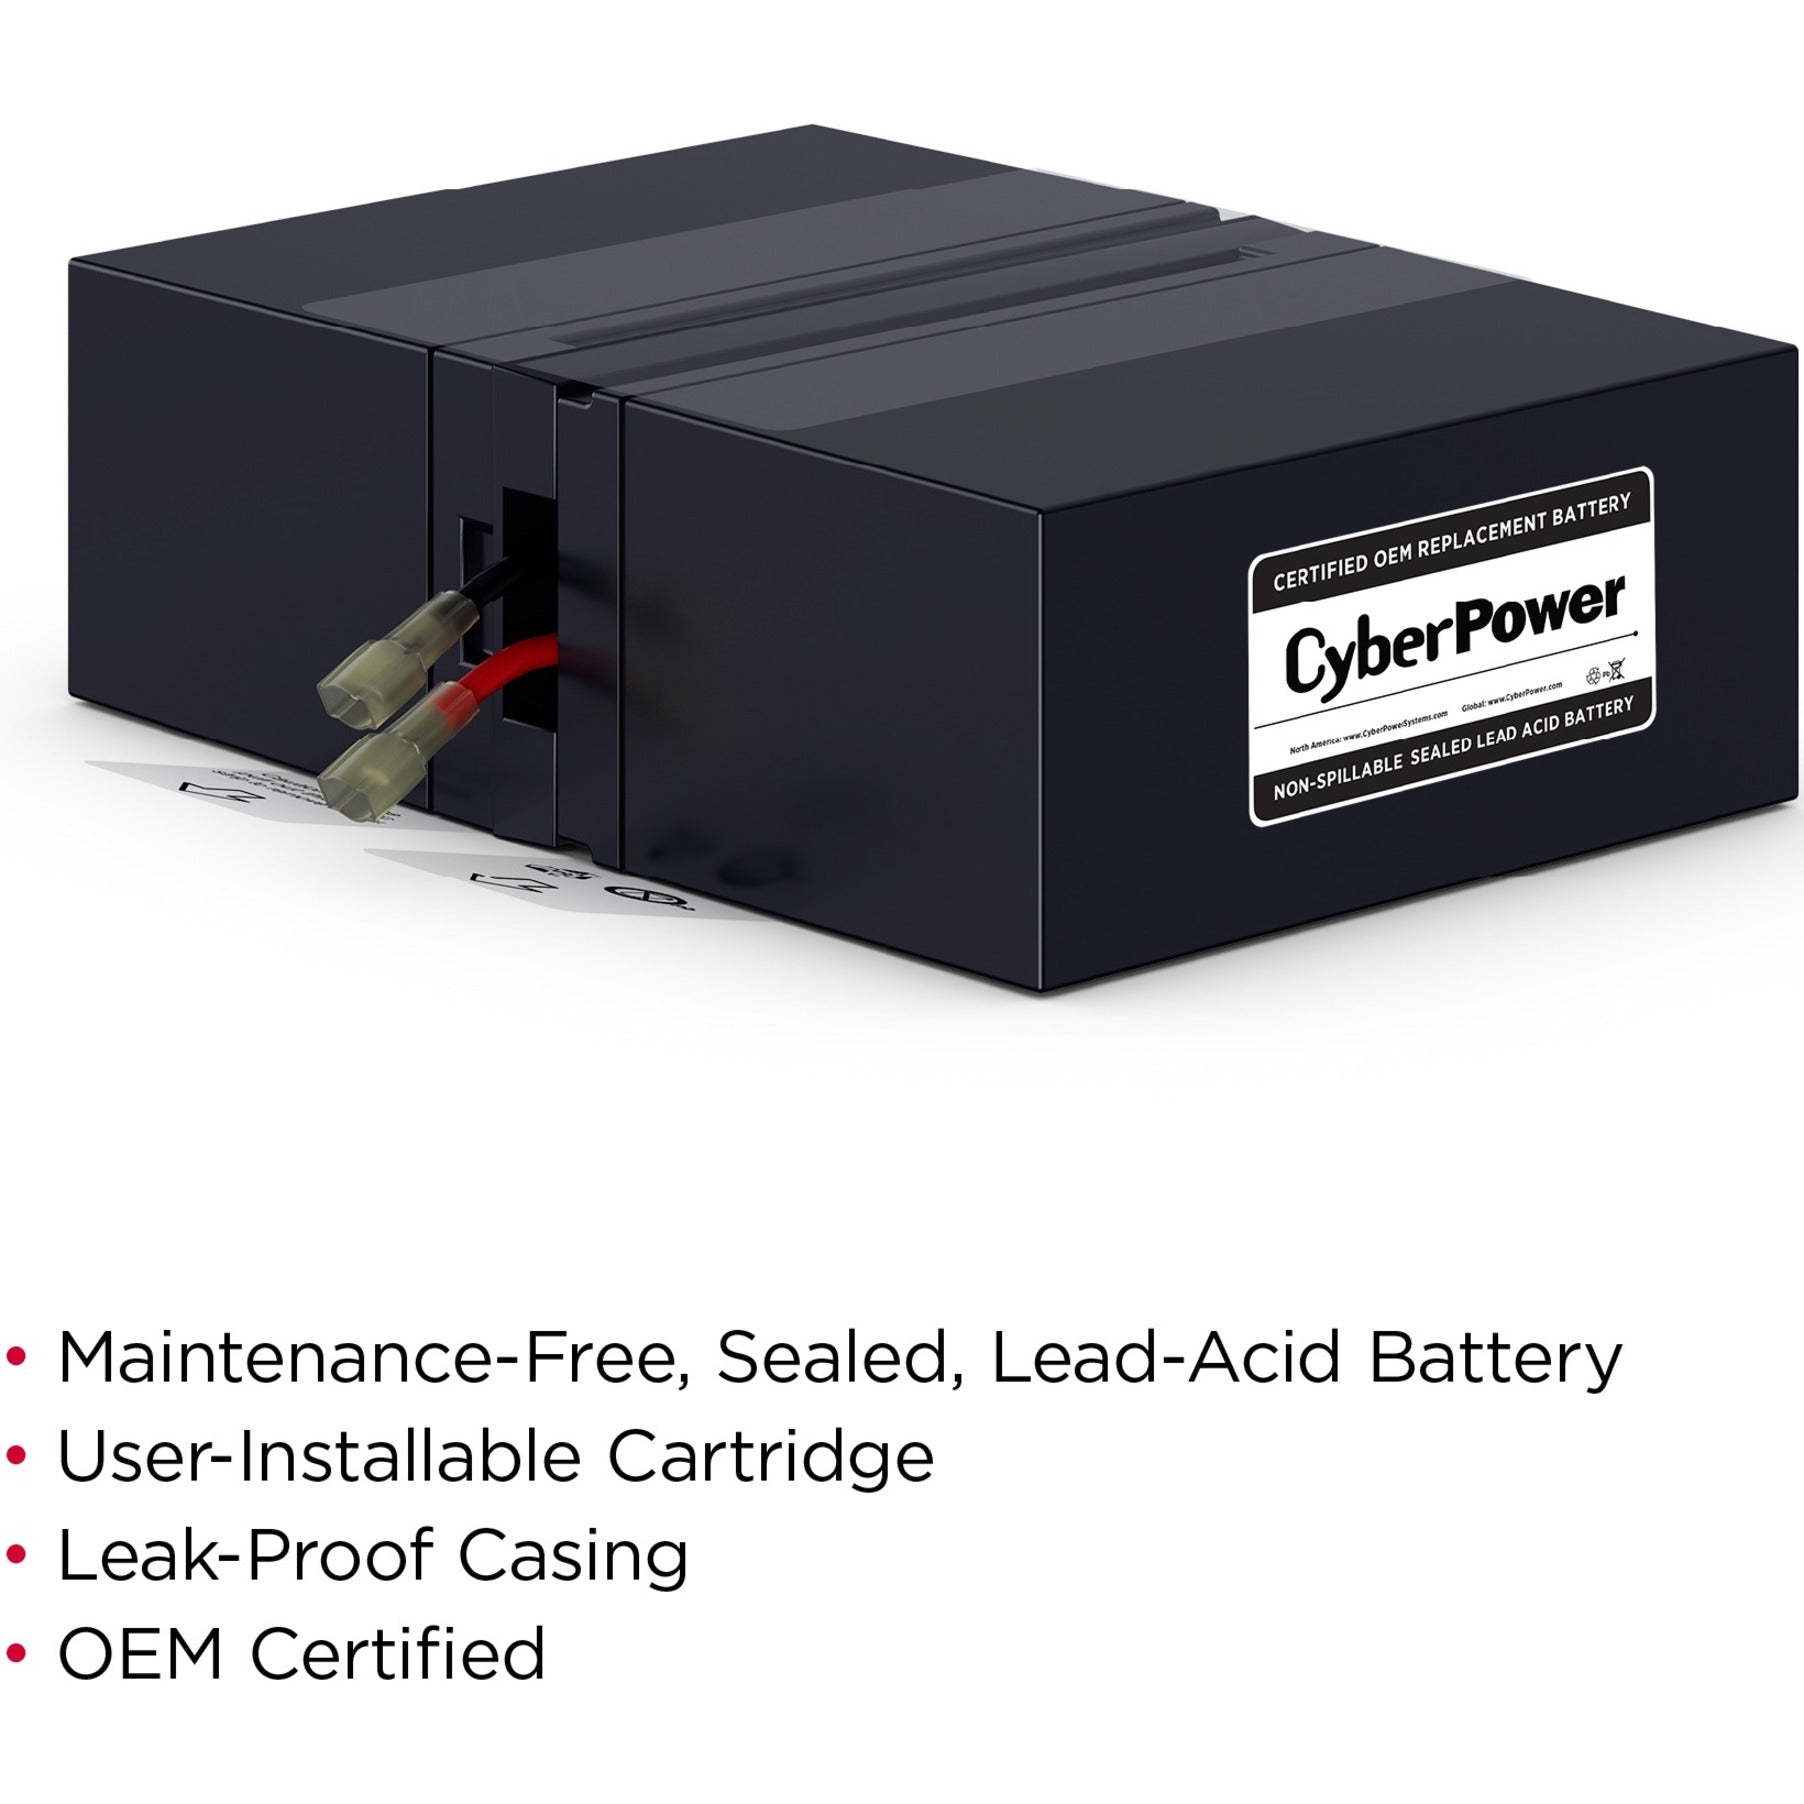 CyberPower RB1280X2B UPS Replacement Battery Cartridge 12V 8AH, 18 Month Warranty, Lead Acid, User Replaceable